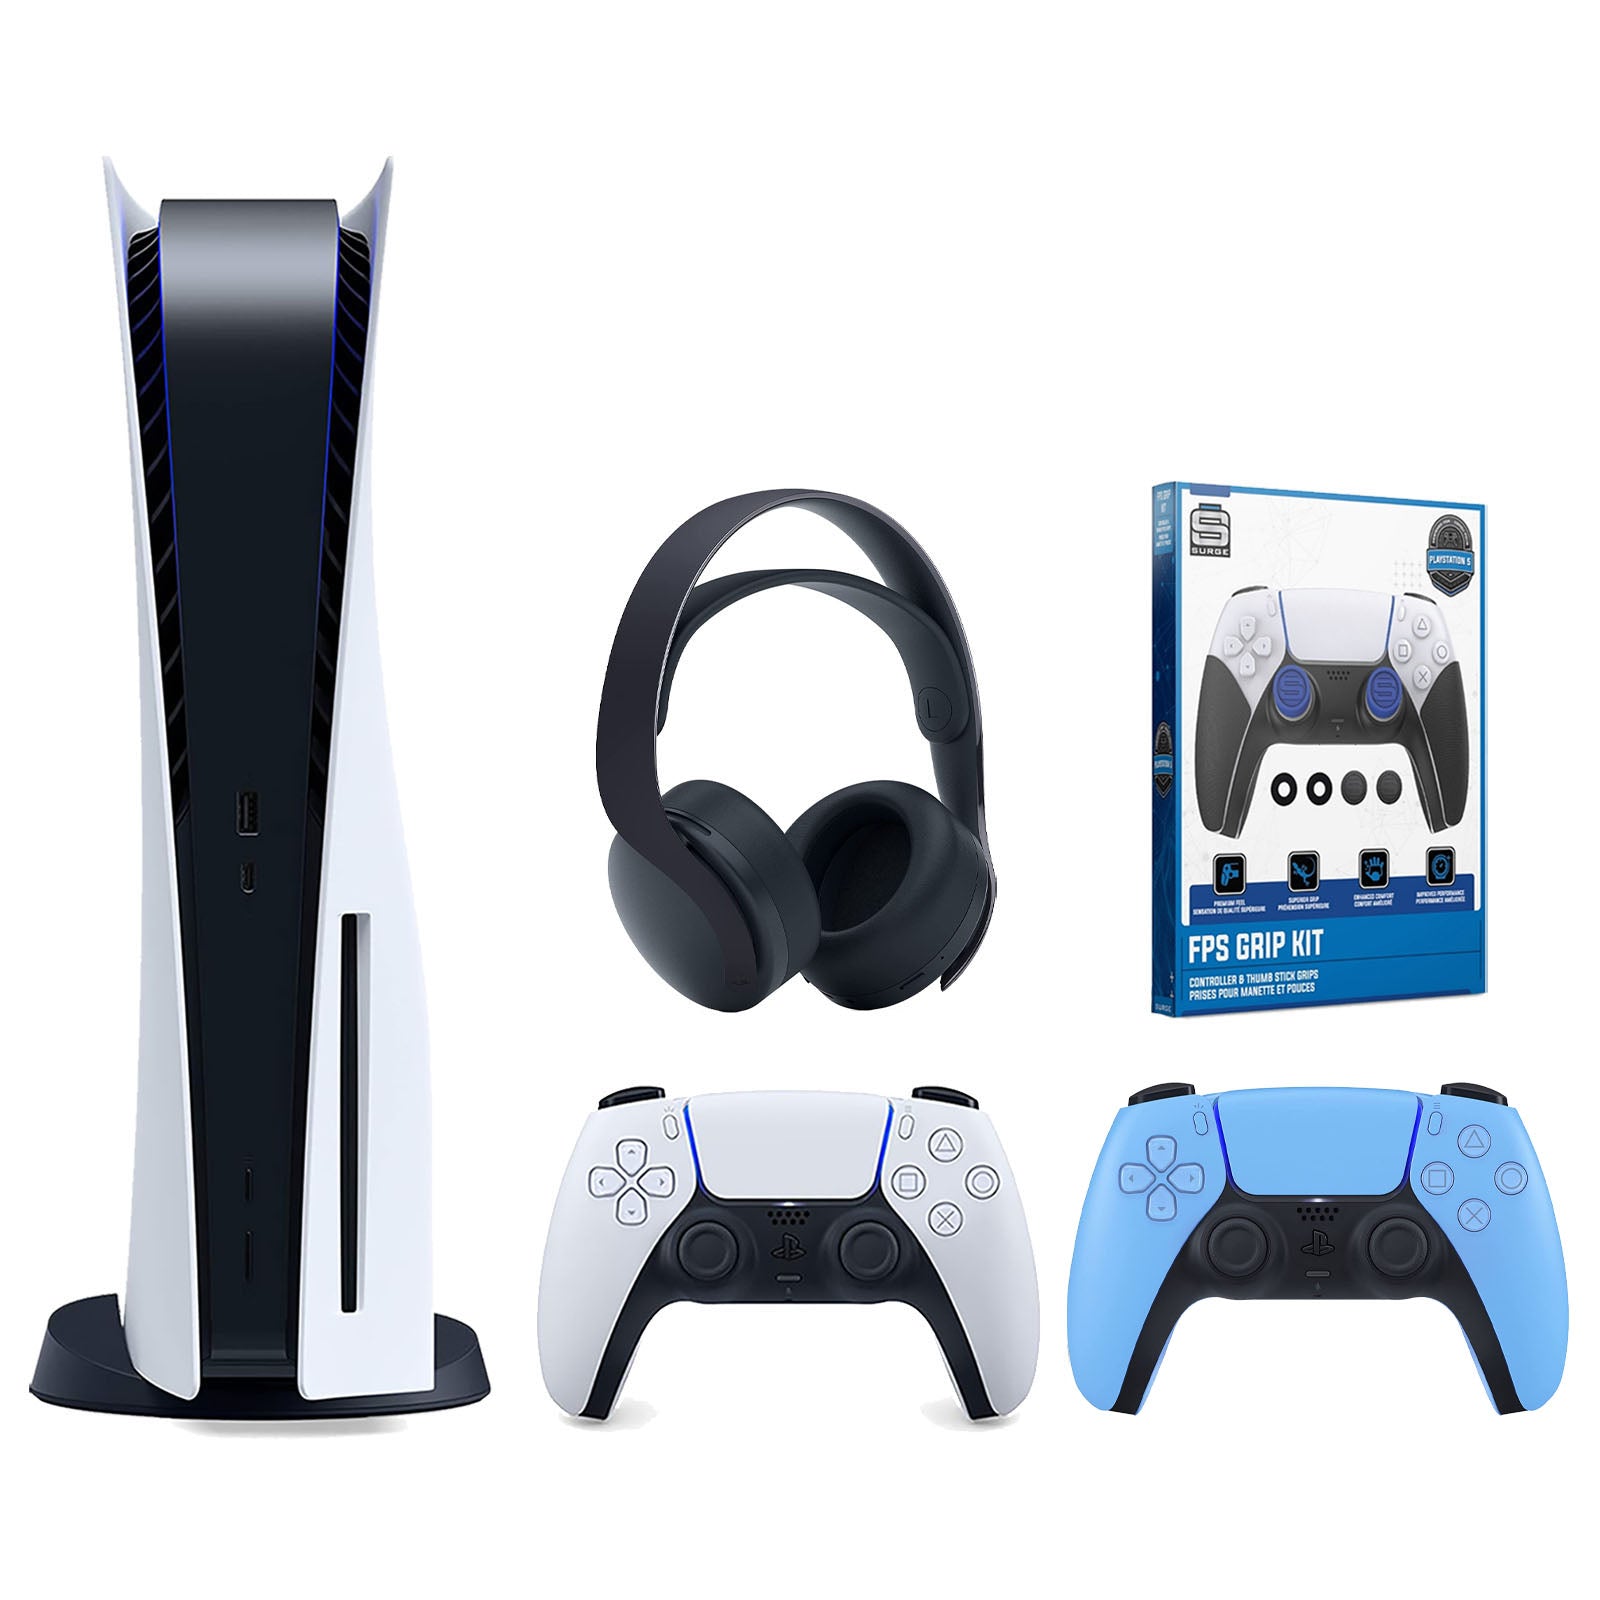 Sony Playstation 5 Disc Version Console with Extra Blue Controller, Black PULSE 3D Headset and Surge FPS Grip Kit With Precision Aiming Rings Bundle - Pro-Distributing